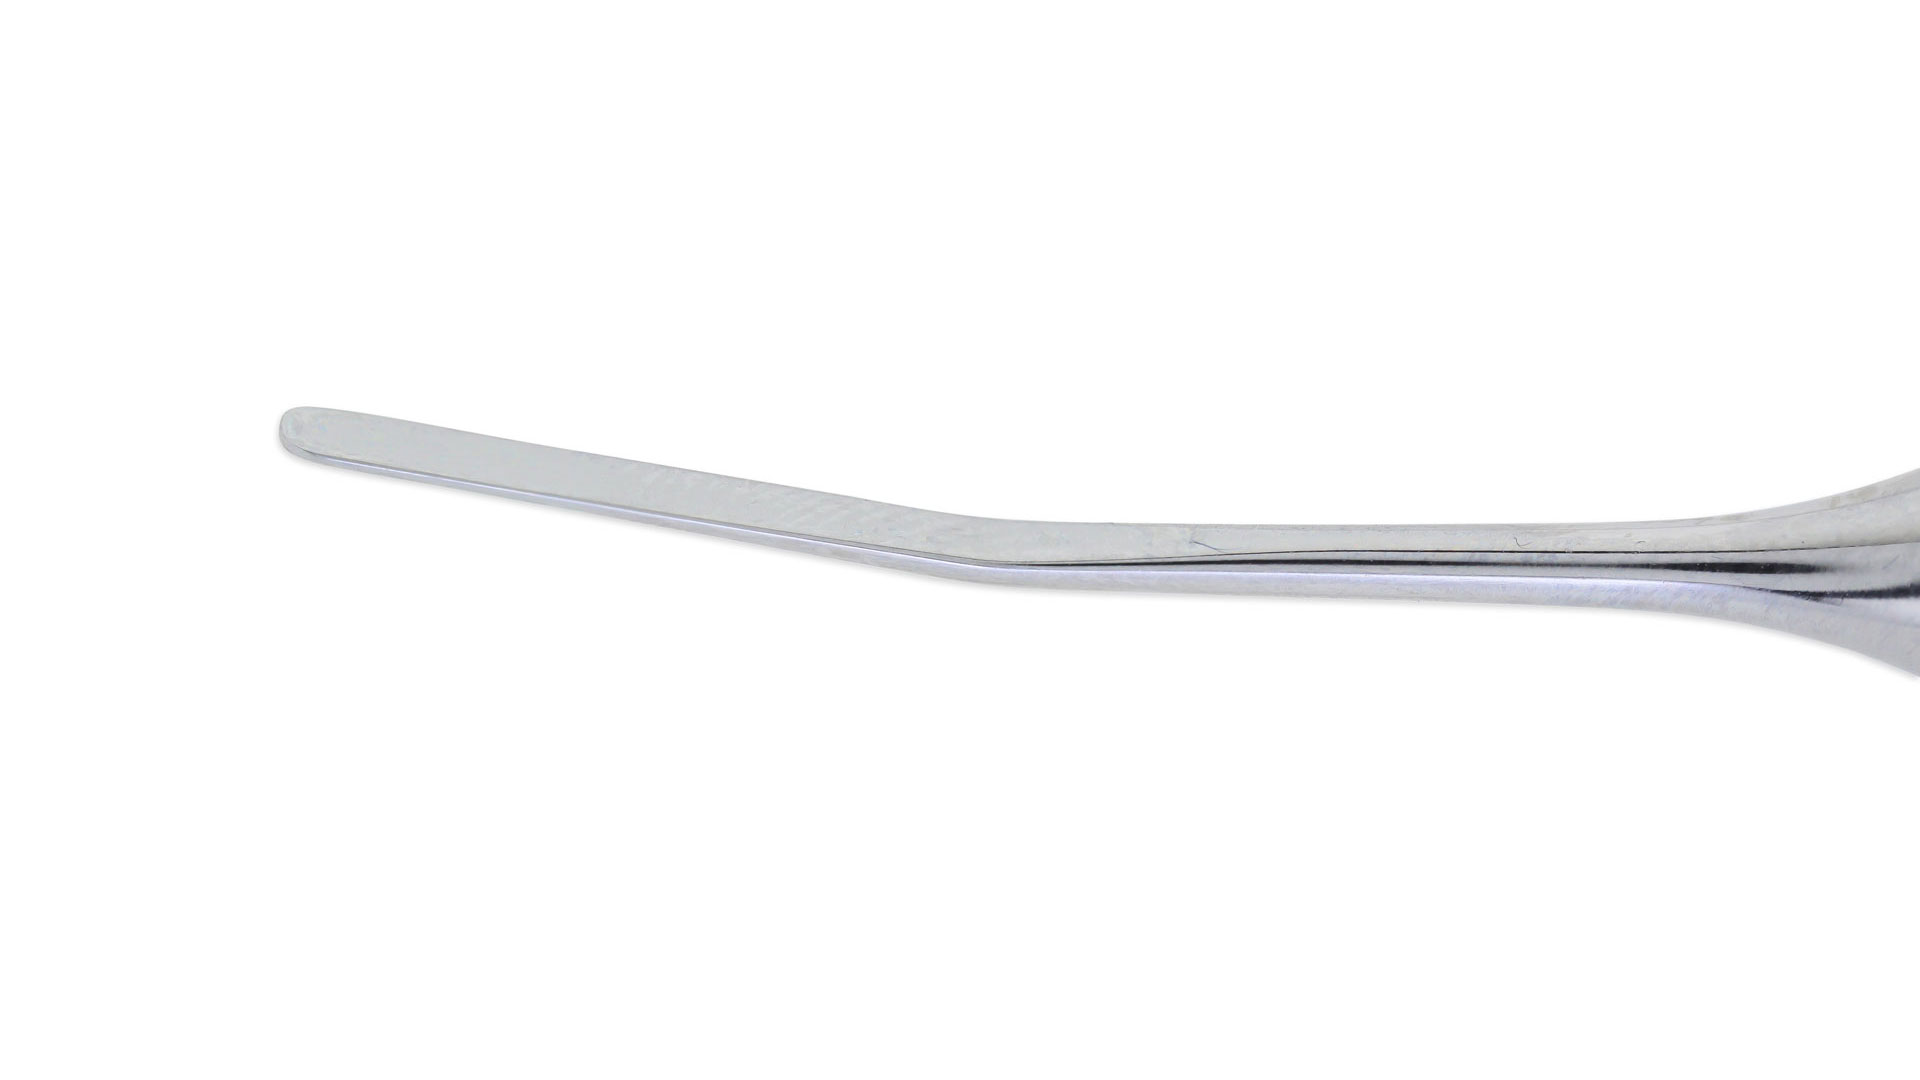 Double-Ended Phlebectomy Hook and Spatula - 1.65mm Hook/2mm Spatula